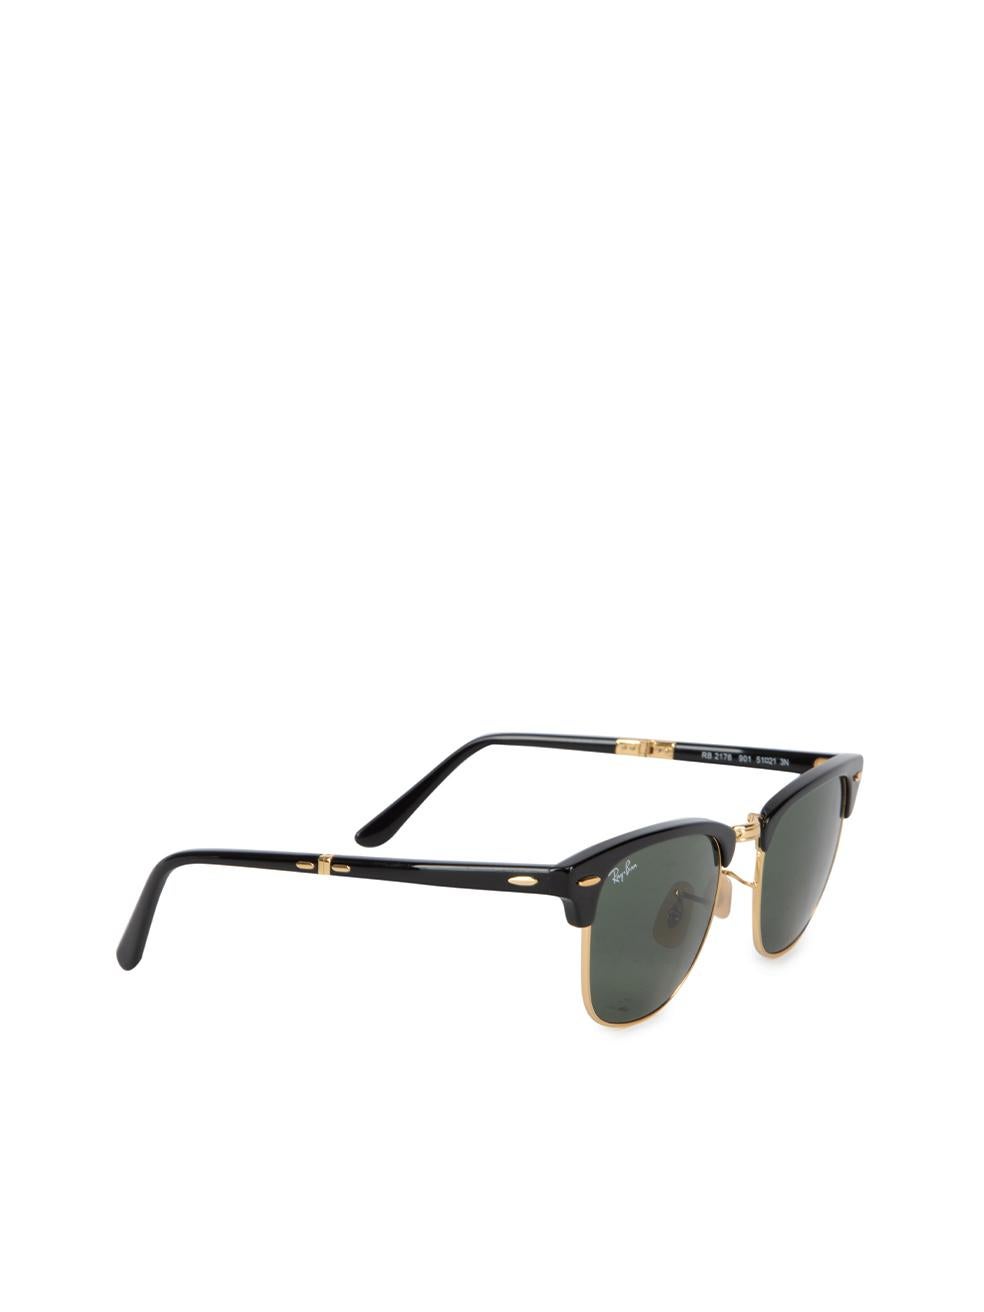 CONDITION is Very good. Minimal wear to sunglasses is evident. Scratches can be seen on both of the arms on this used Ray Ban designer resale item. This item comes with original case and lens cloth. Details Black and gold Acetate and metal Square